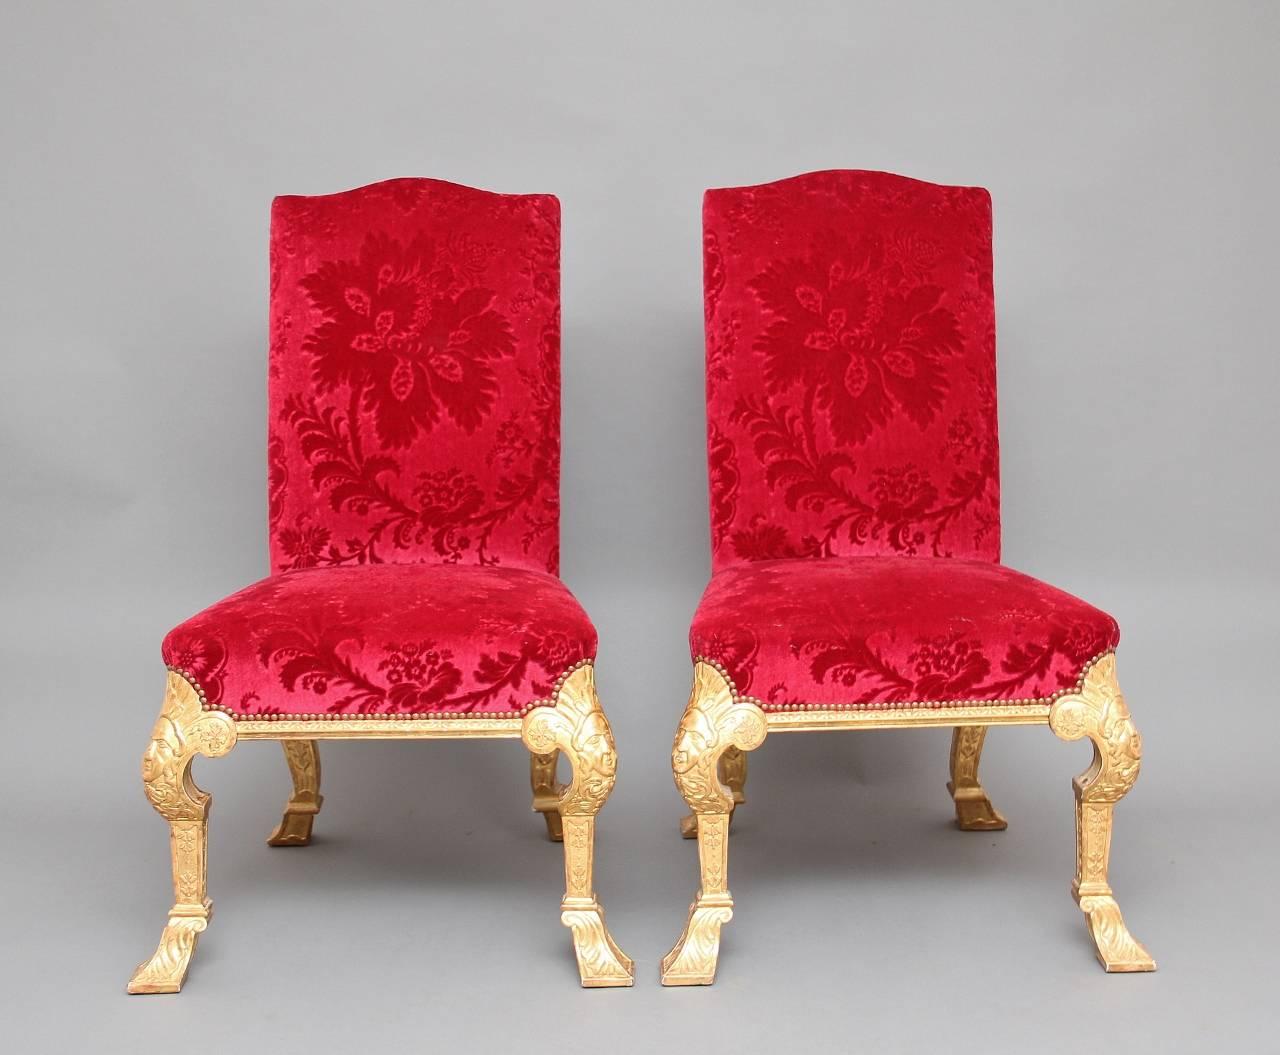 A fabulous pair of early 20th century carved and gilded chairs in the George I style, the front cabriole legs have carved mask heads on the knees and carved decoration running down the legs, the back legs are also profusely carved, the seat rails